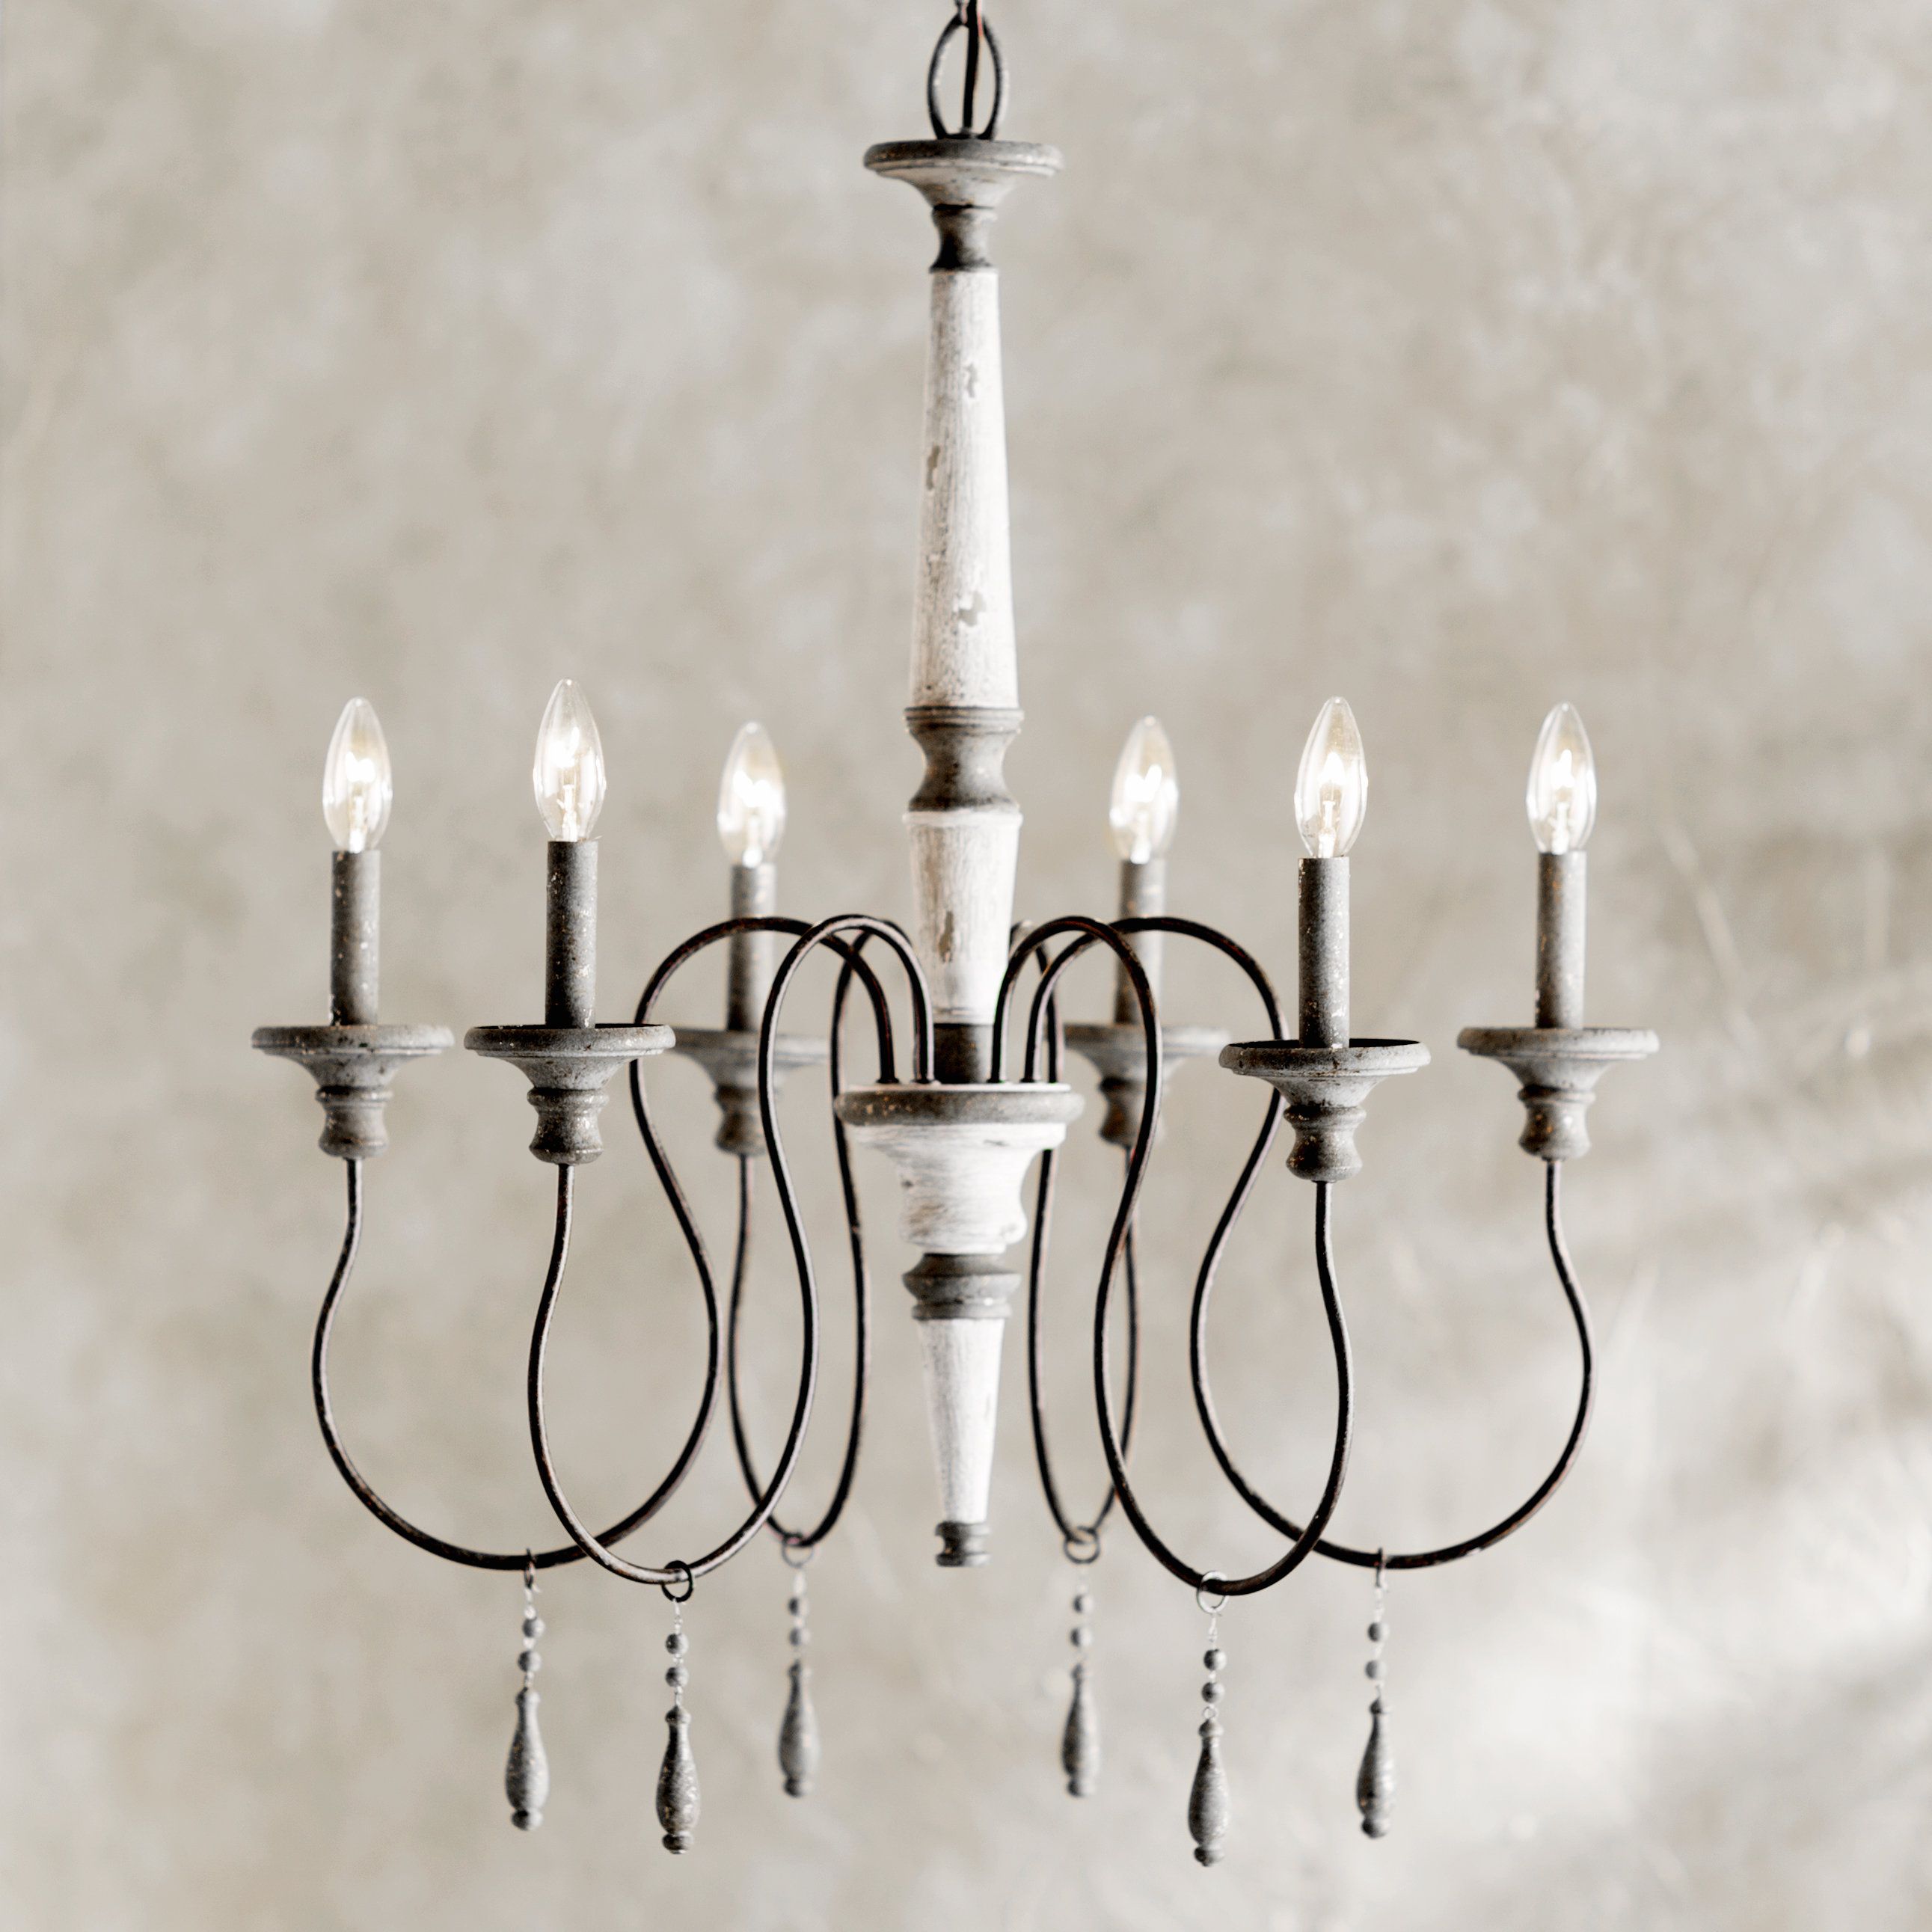 Farmhouse & Rustic Lark Manor Chandeliers | Birch Lane Throughout Bouchette Traditional 6 Light Candle Style Chandeliers (View 25 of 30)